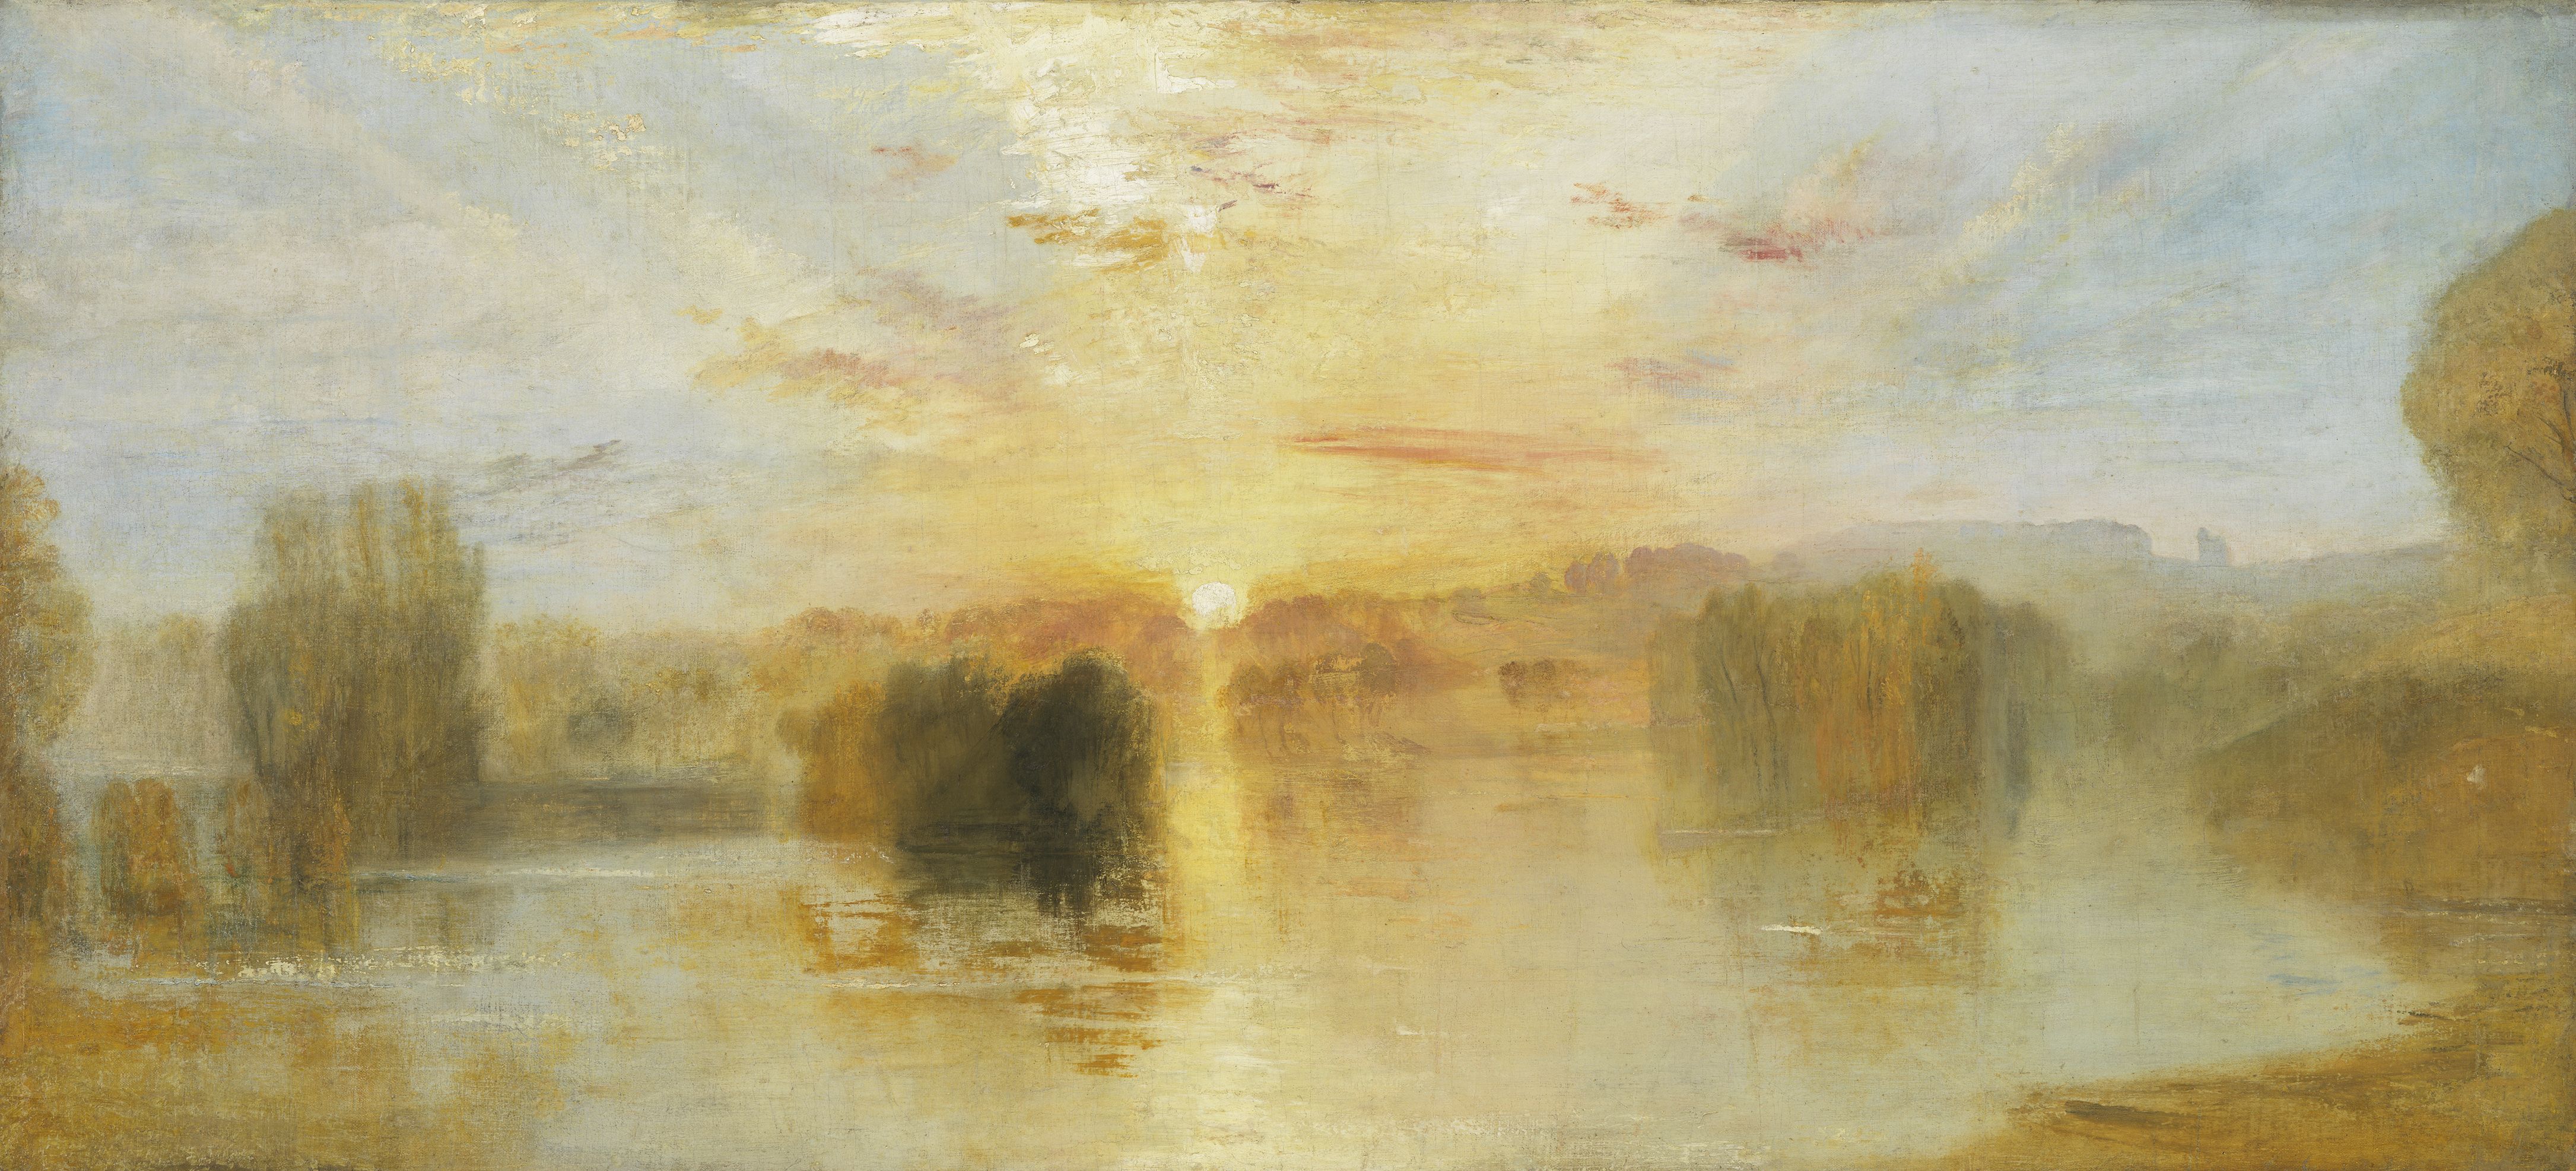 LET THERE BE LIGHT: JMW Turner’s The Lake Petworth, Sunset Sample Study c1827-1828, currently at the National Gallery of Ireland 